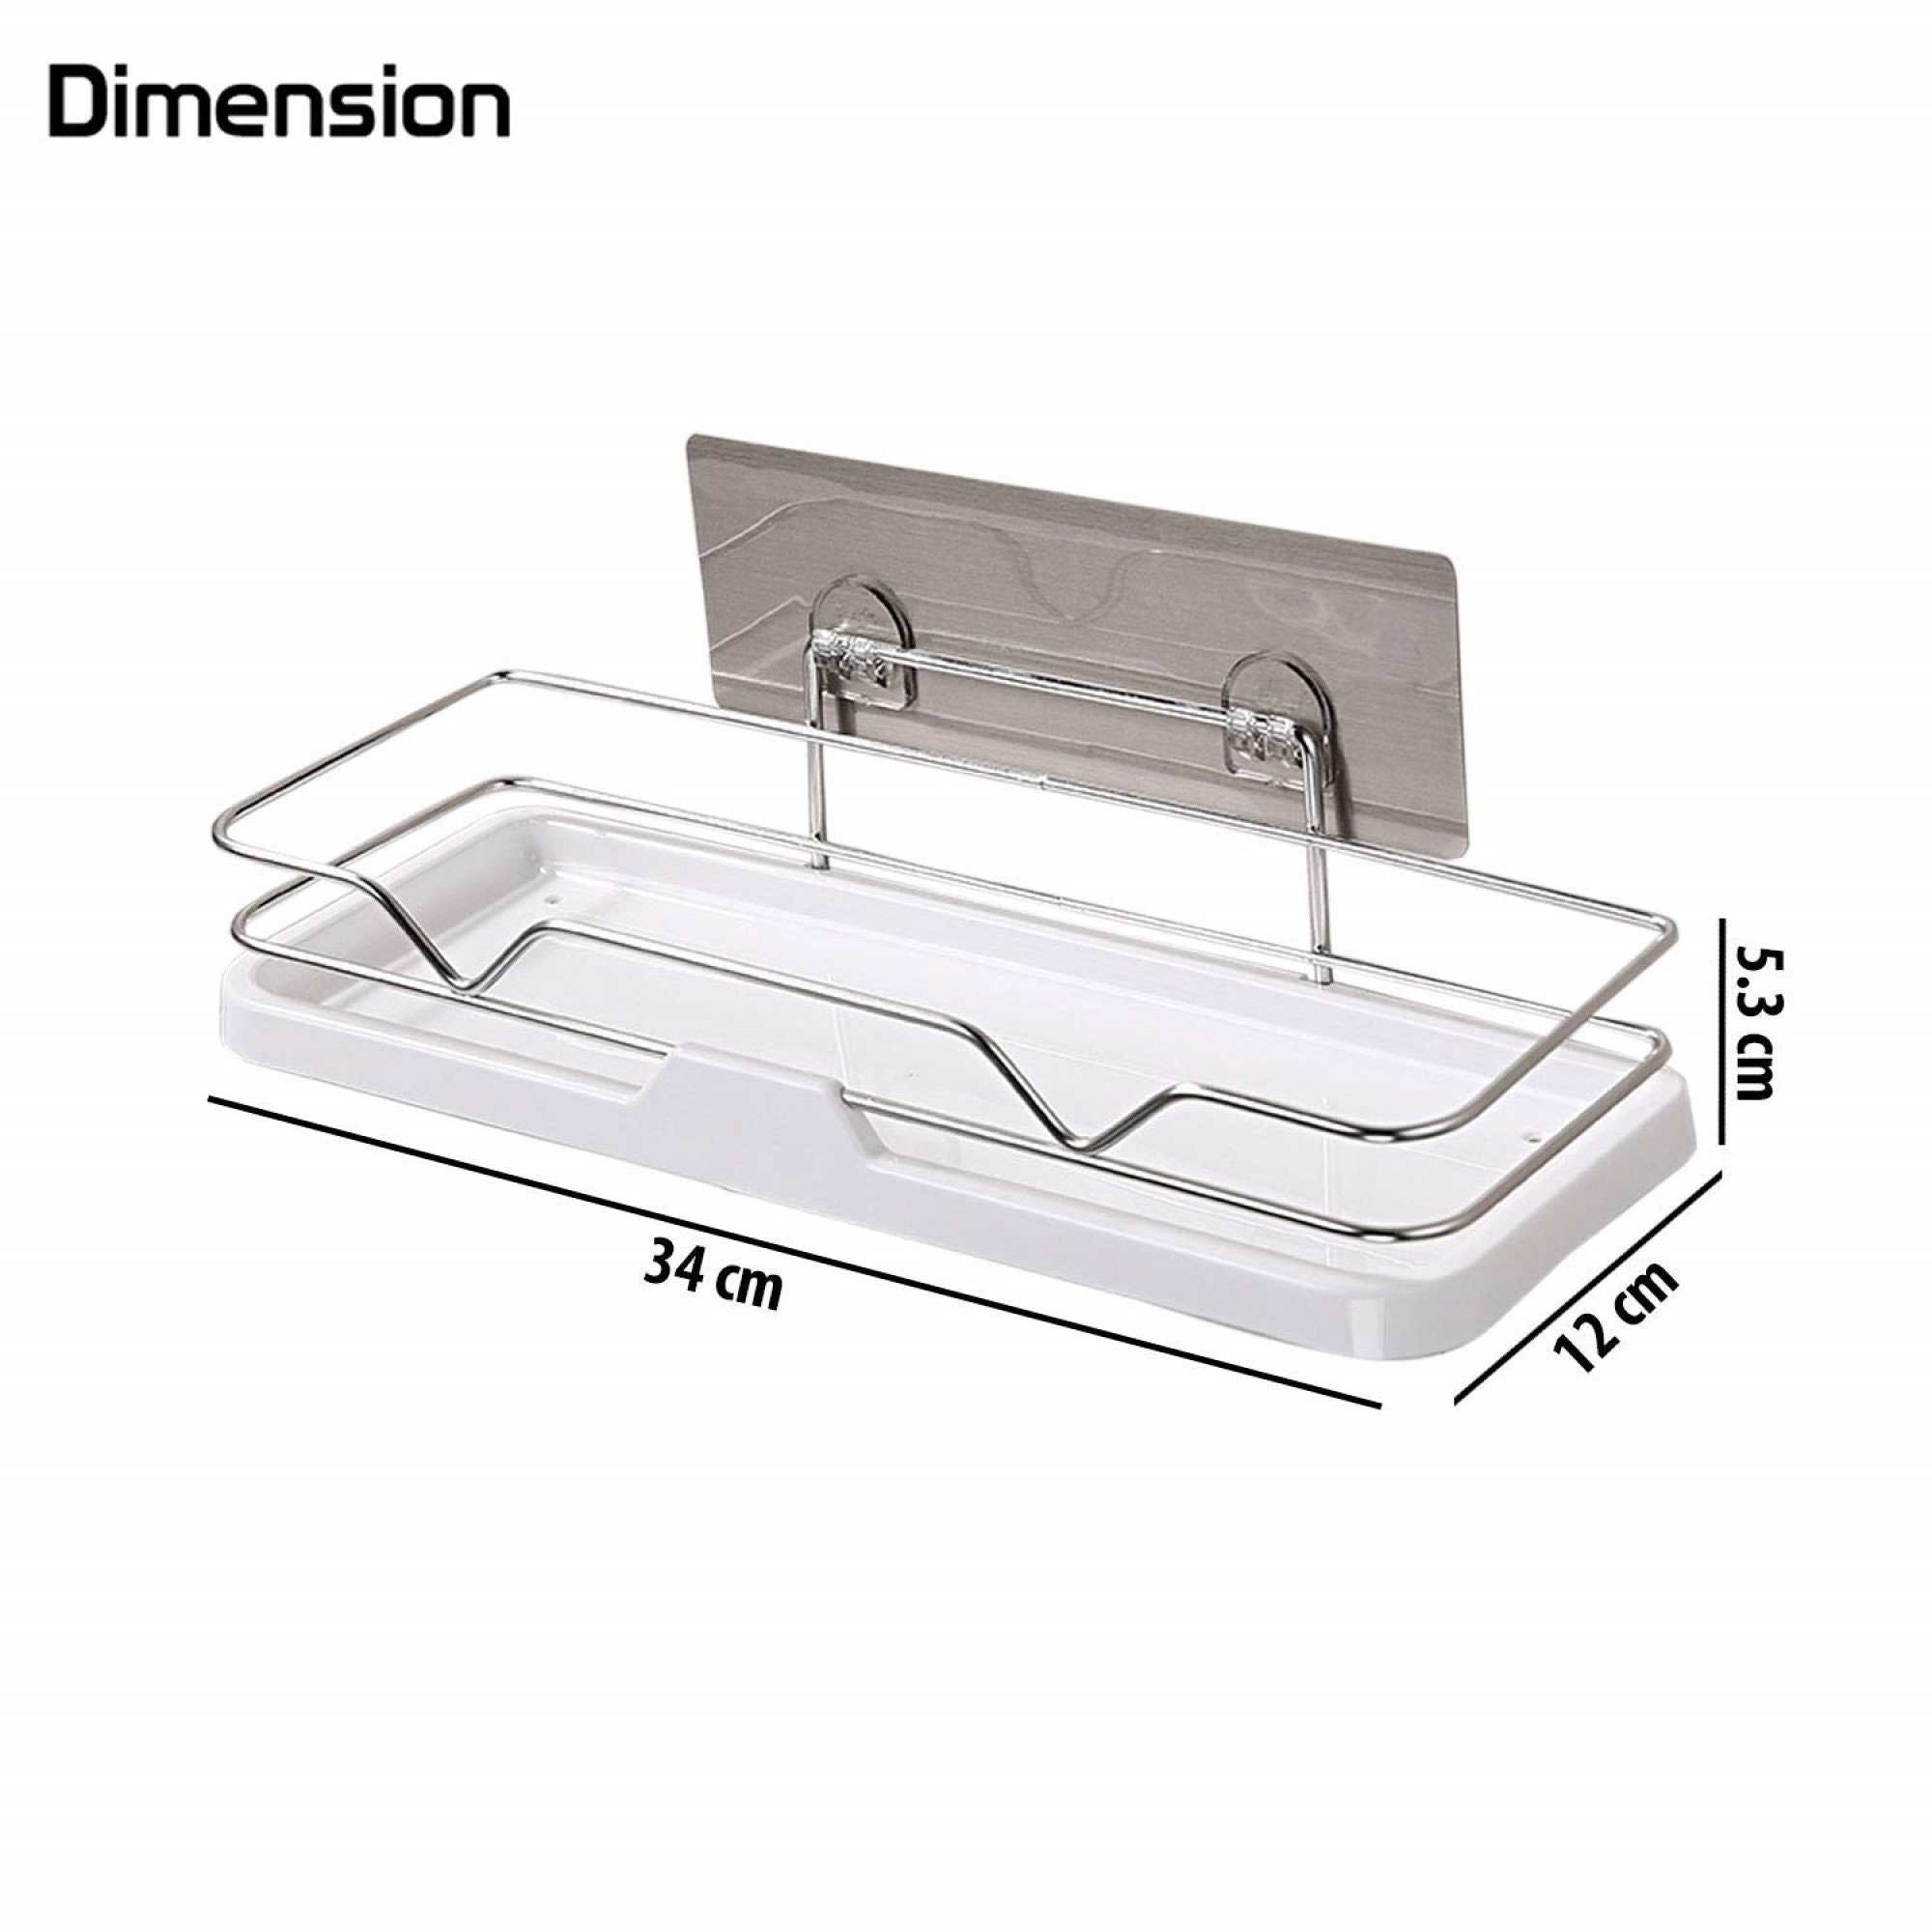  bywoods Bathroom Shelves, Self Adhesive Shower Shelves for  Bathroom (Wall Mounted, No Drill, Plastic, Pack of 3) : Home & Kitchen